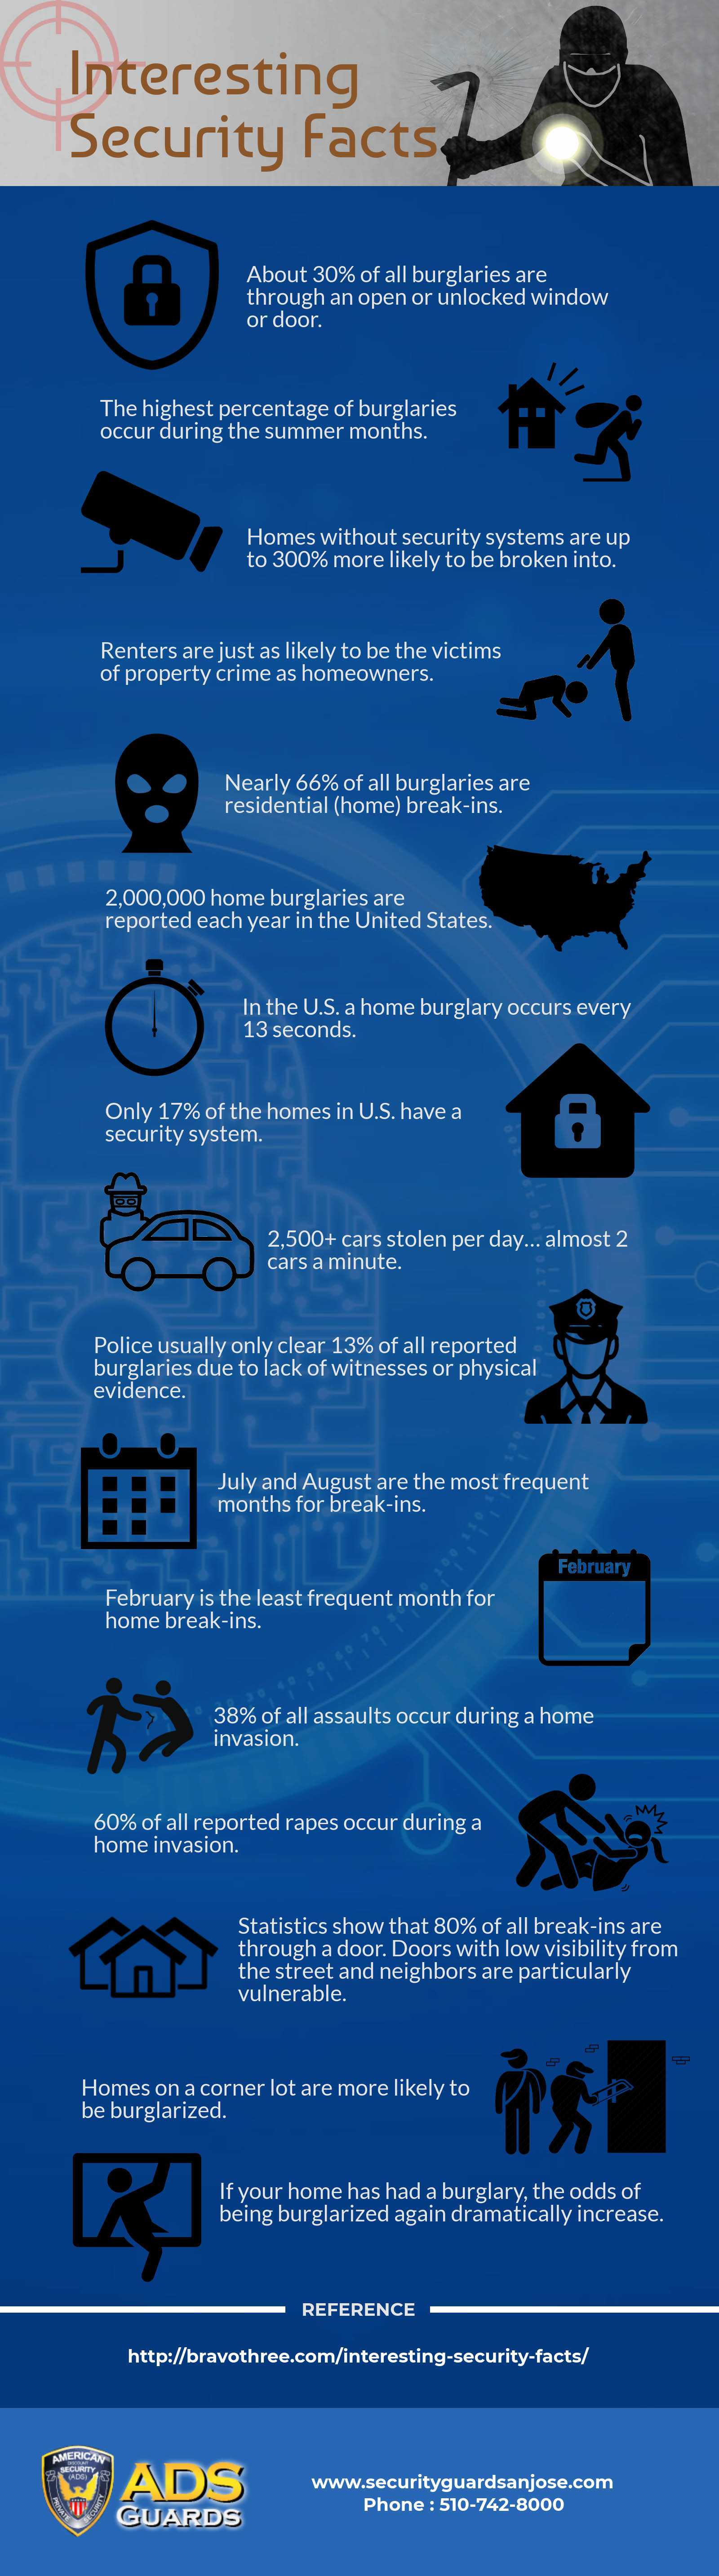 INTERESTING-SECURITY-FACTS-infographic-plaza